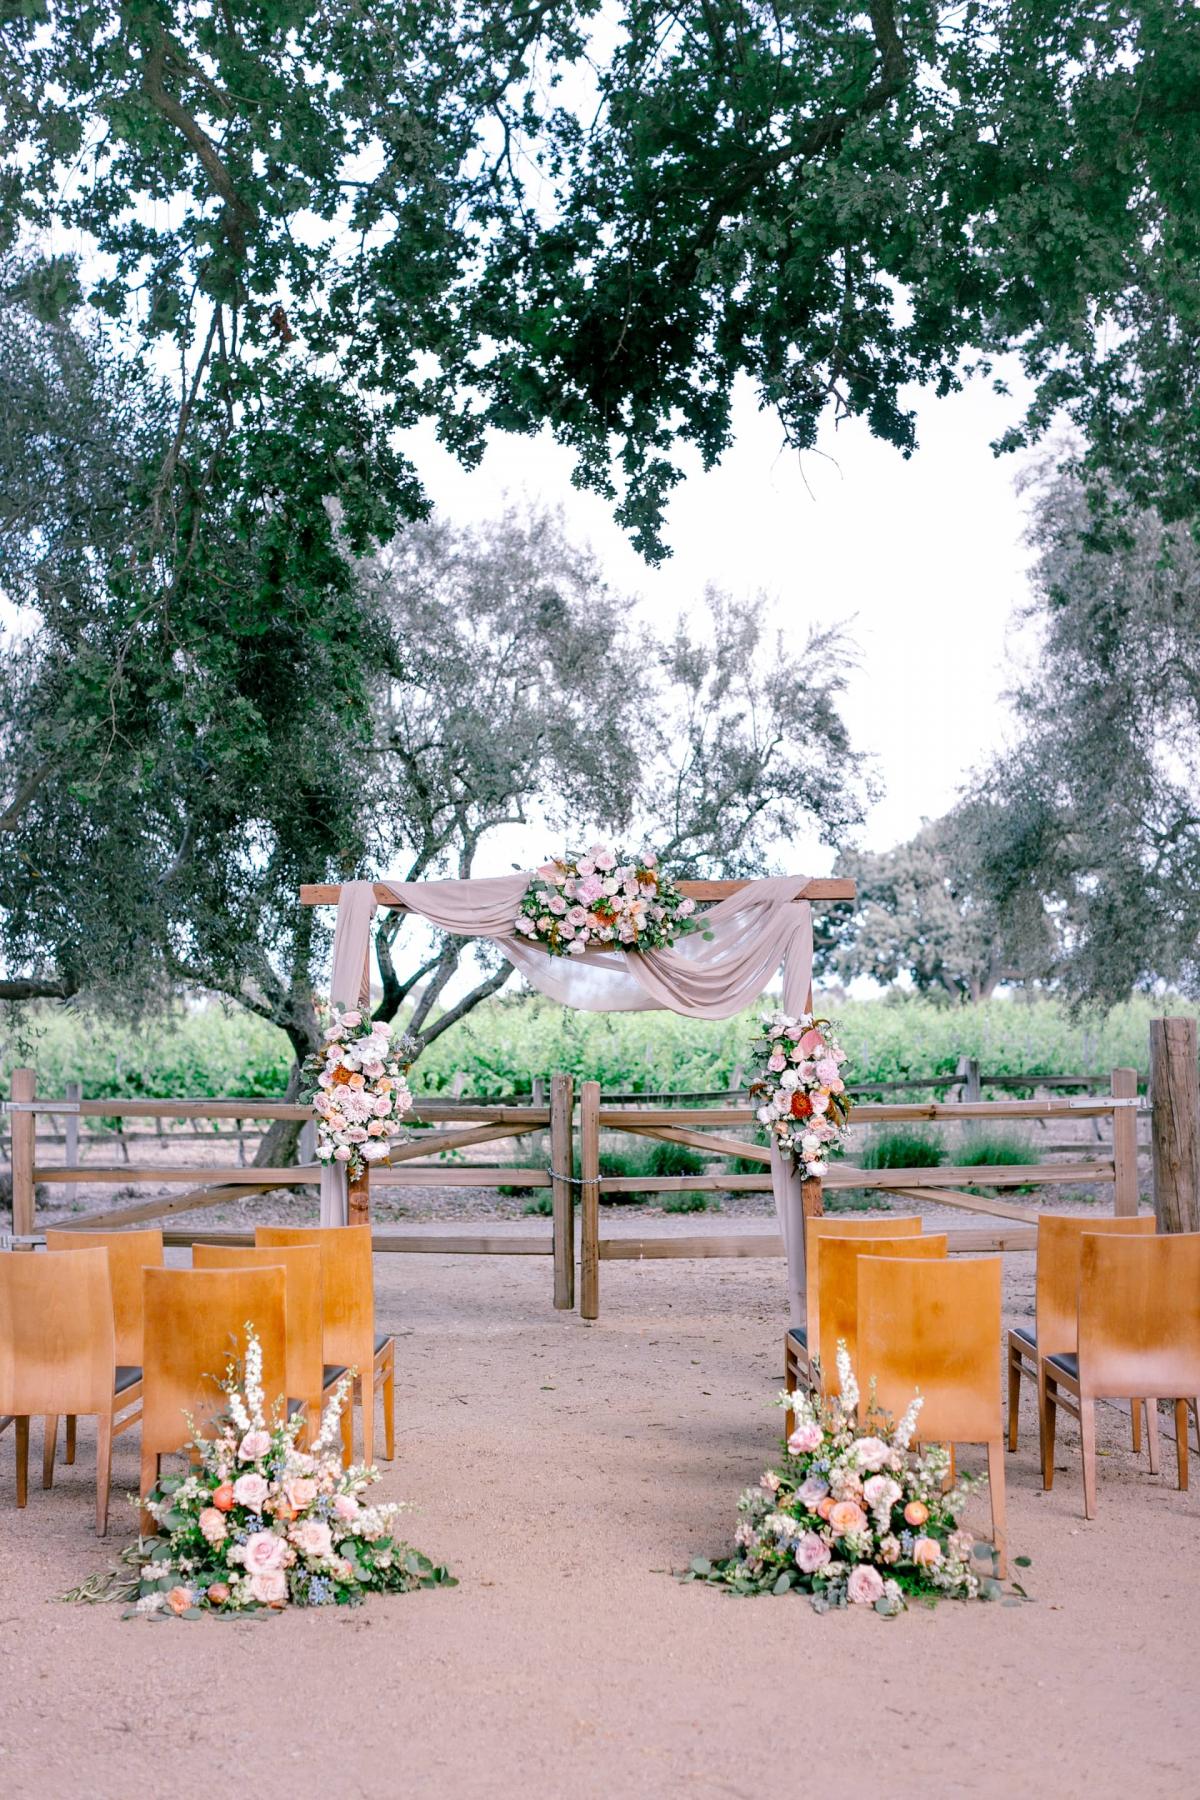 Outdoor Reception Area with Chairs, Flower Arrangements & Archway for Mika & James's Wedding